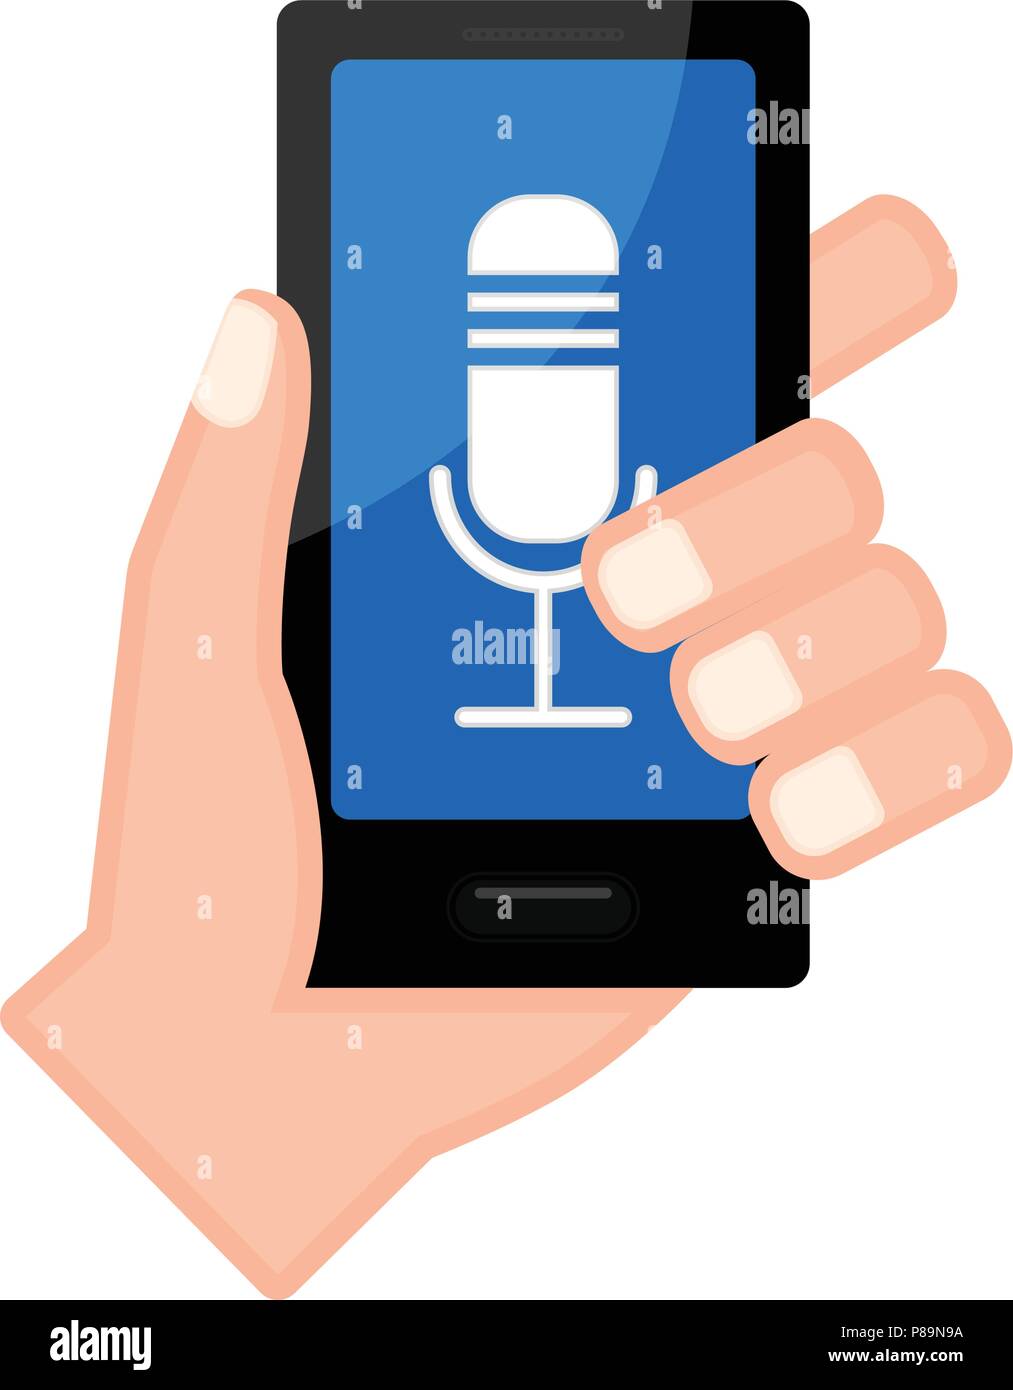 Hand holding a smartphone with a microphone icon Stock Vector